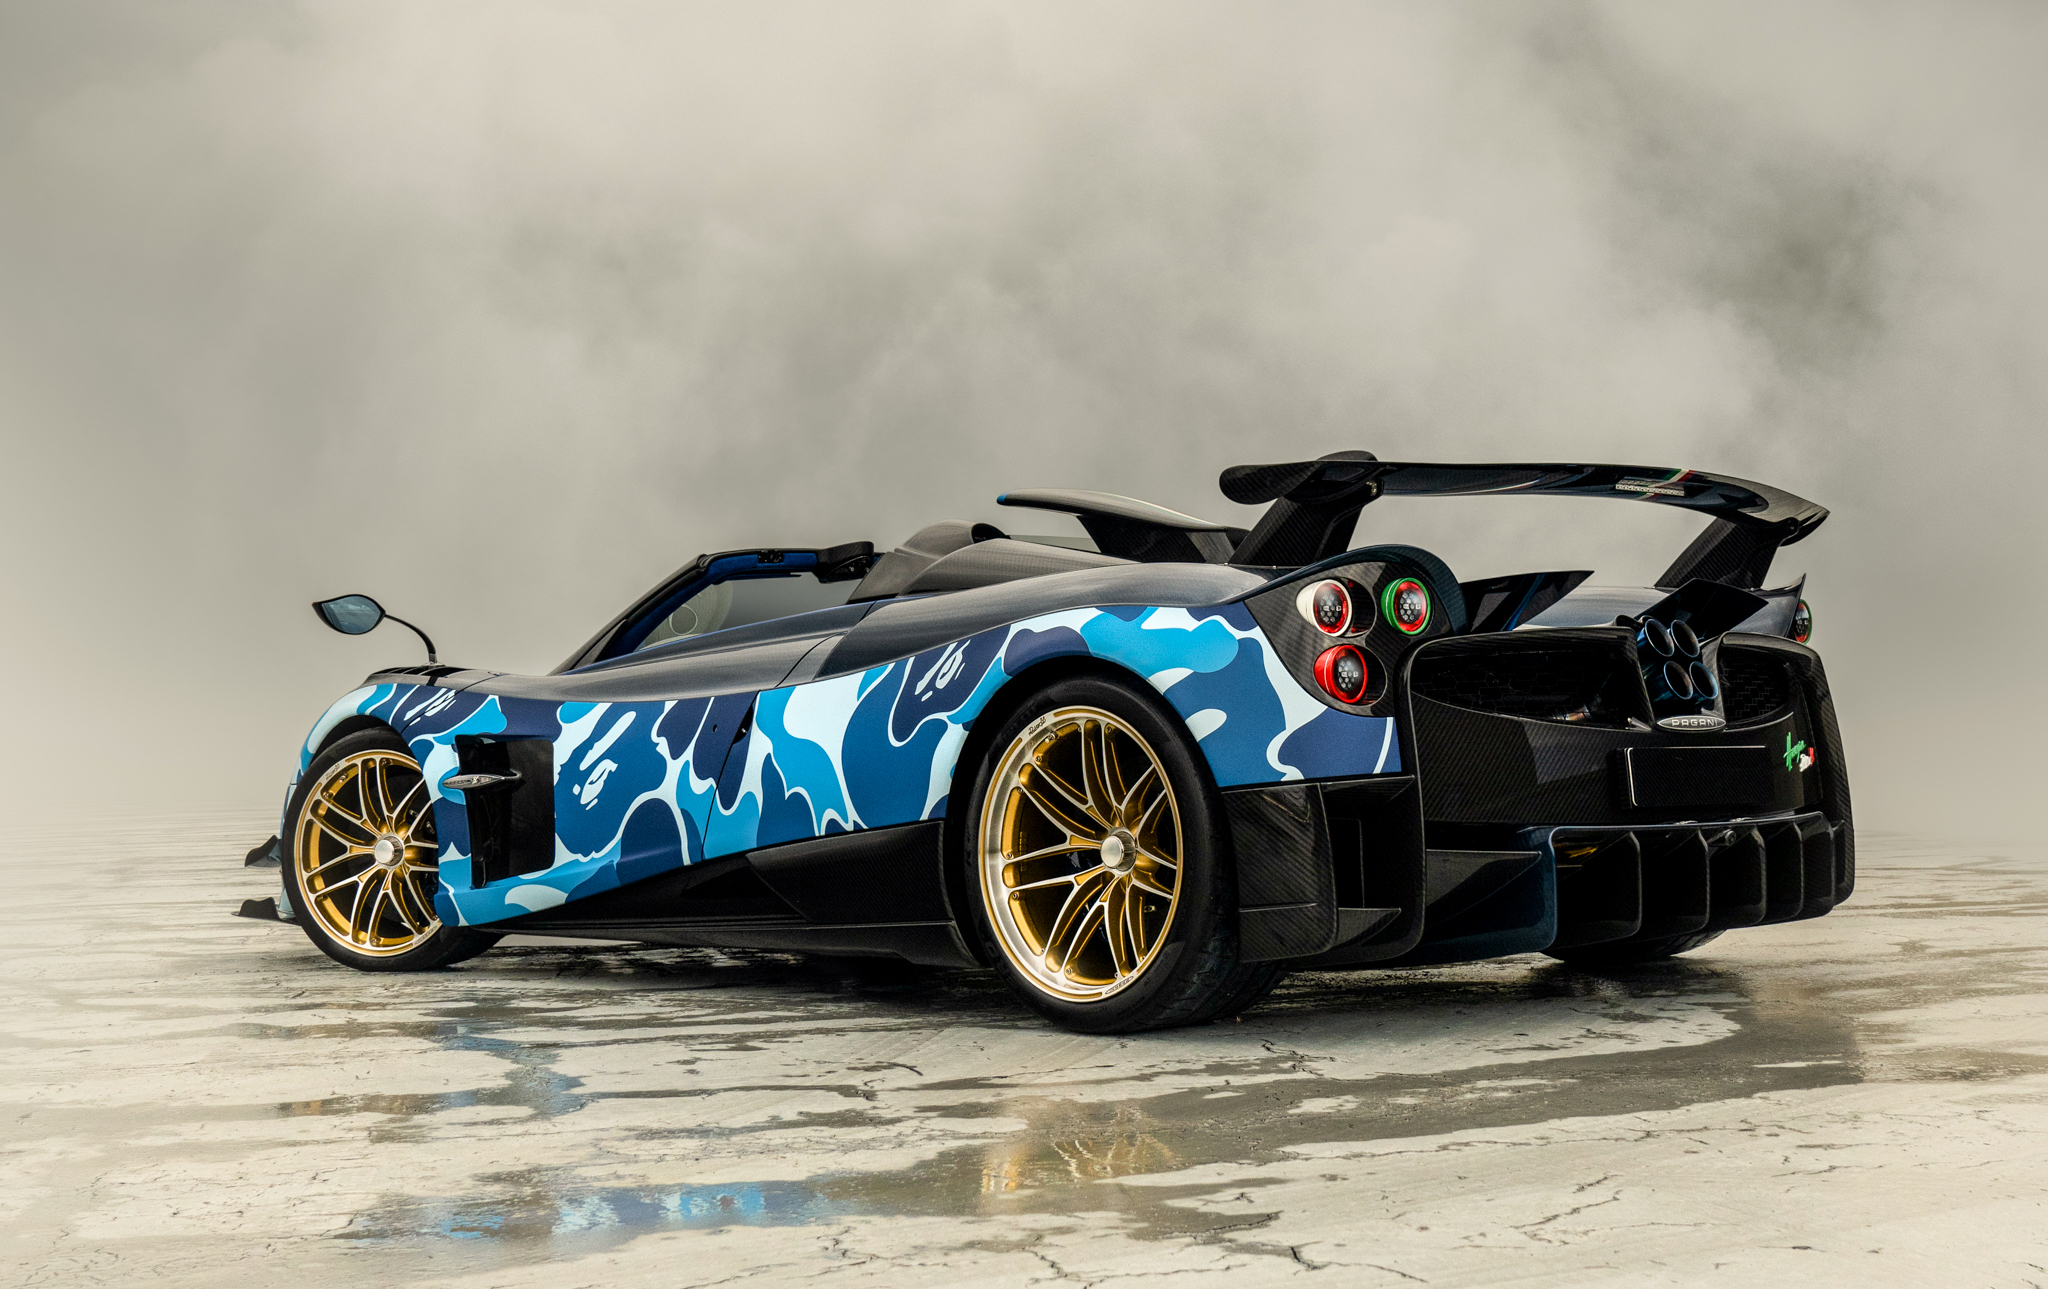 Pagani and Bathing Ape partner up to create a range of awesome